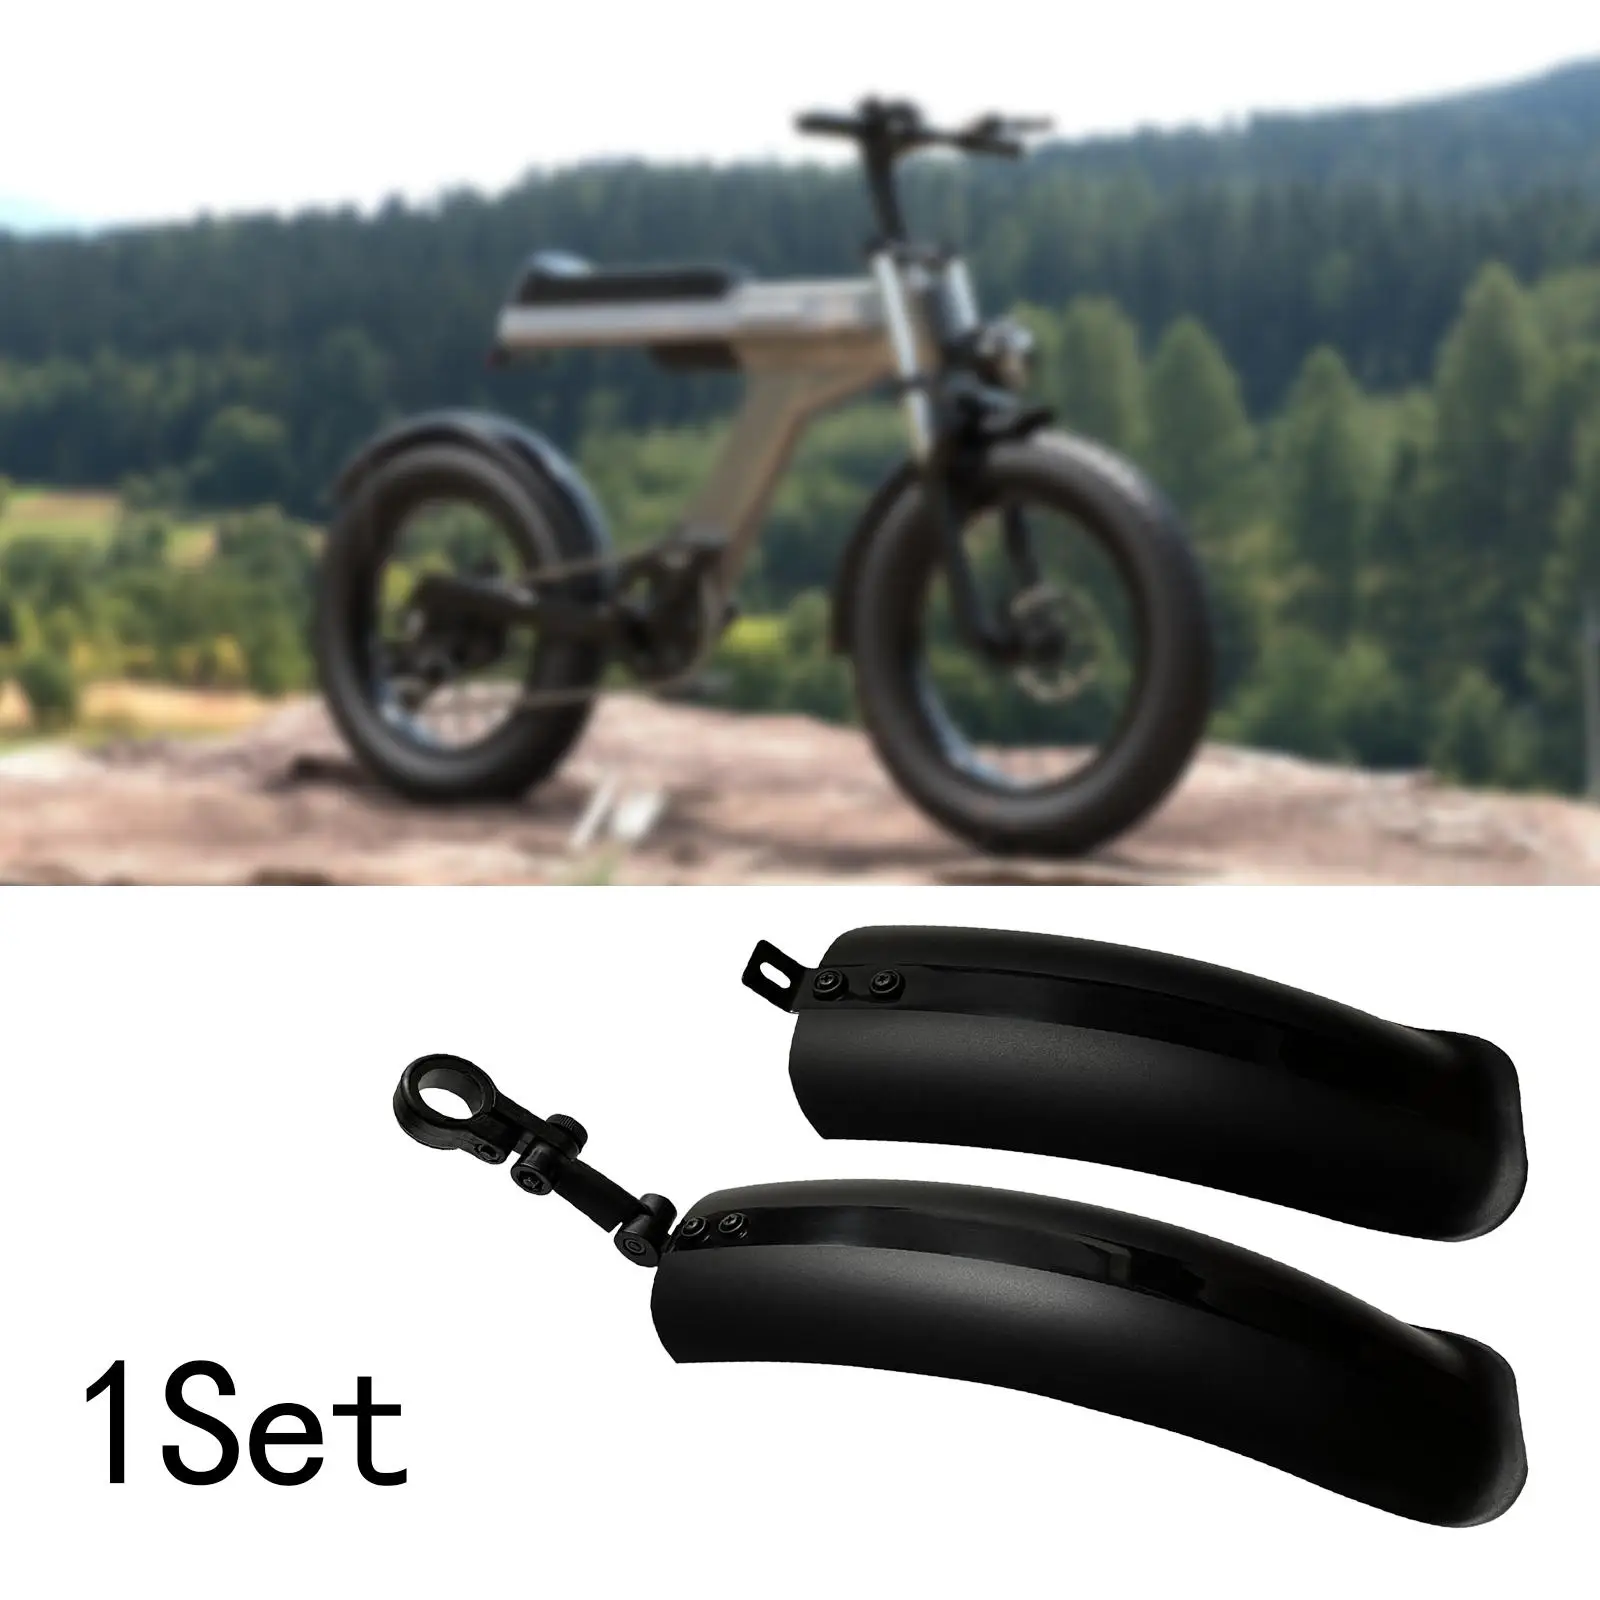 Bike Mudguard Front Rear Set Front Rear Fenders Equipment Wheel Protection Portable Bikes Mud Guard for Beach Bikes Outdoor